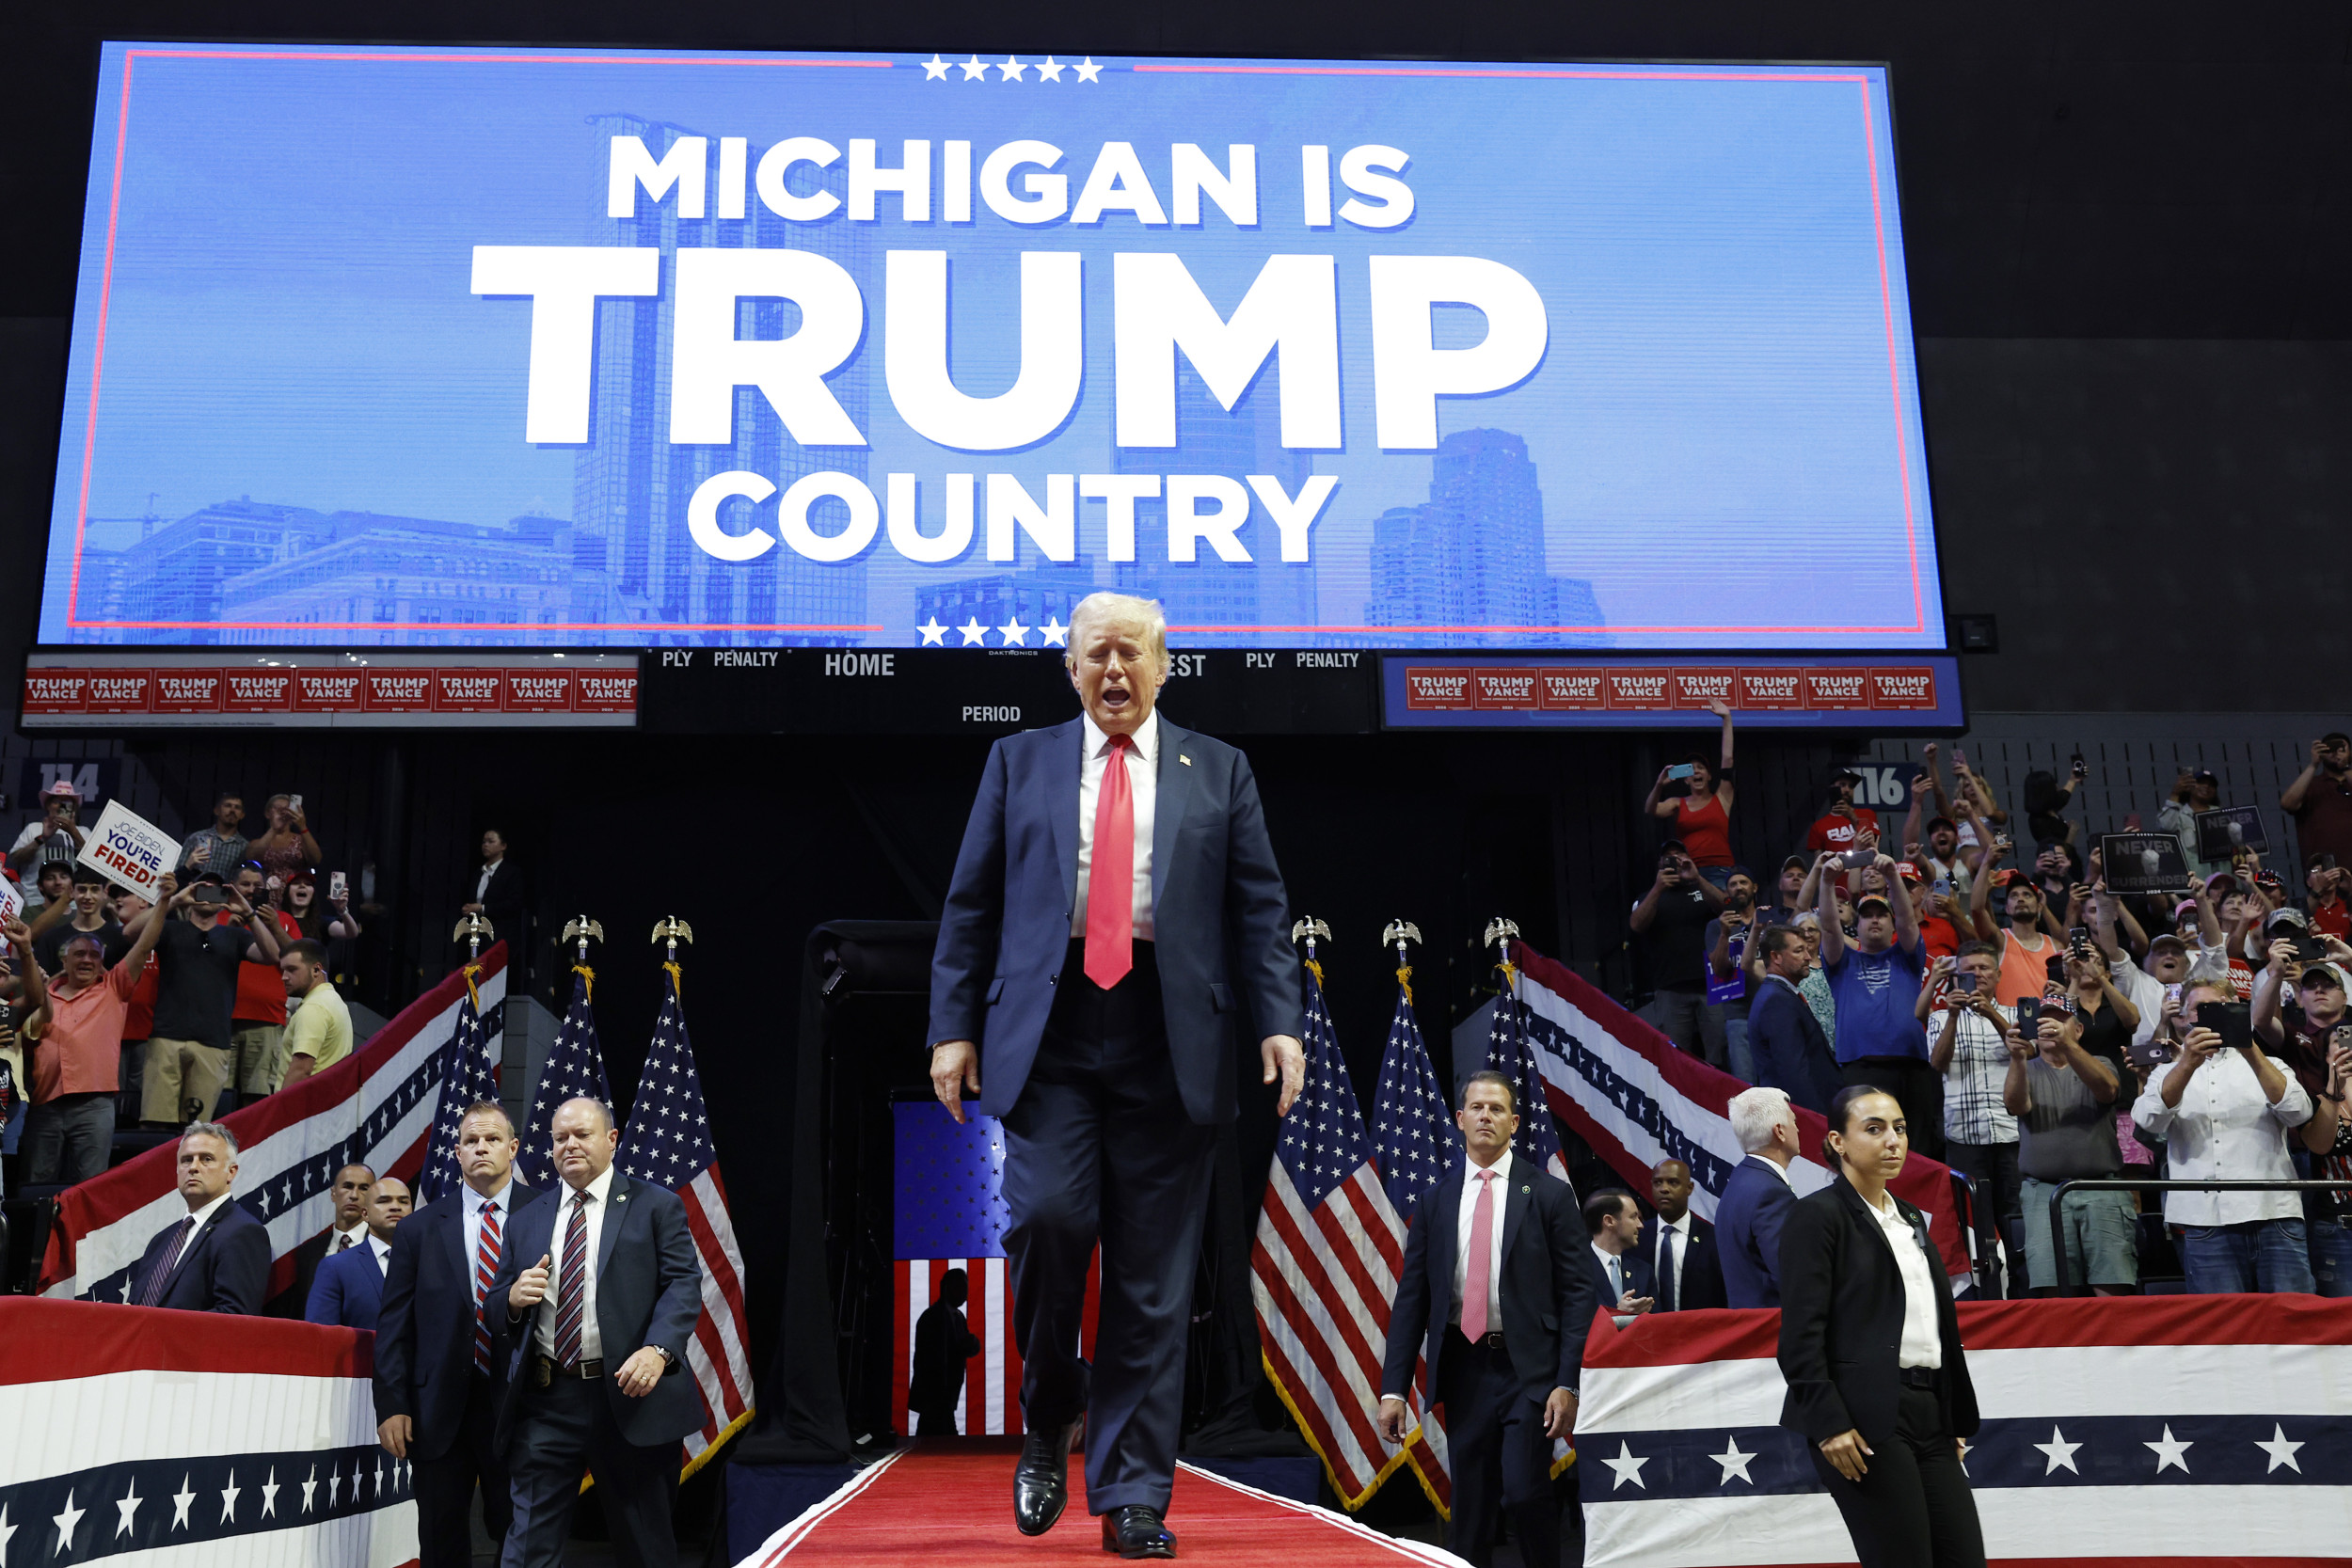 Key Moments from Donald Trump's Michigan Rally